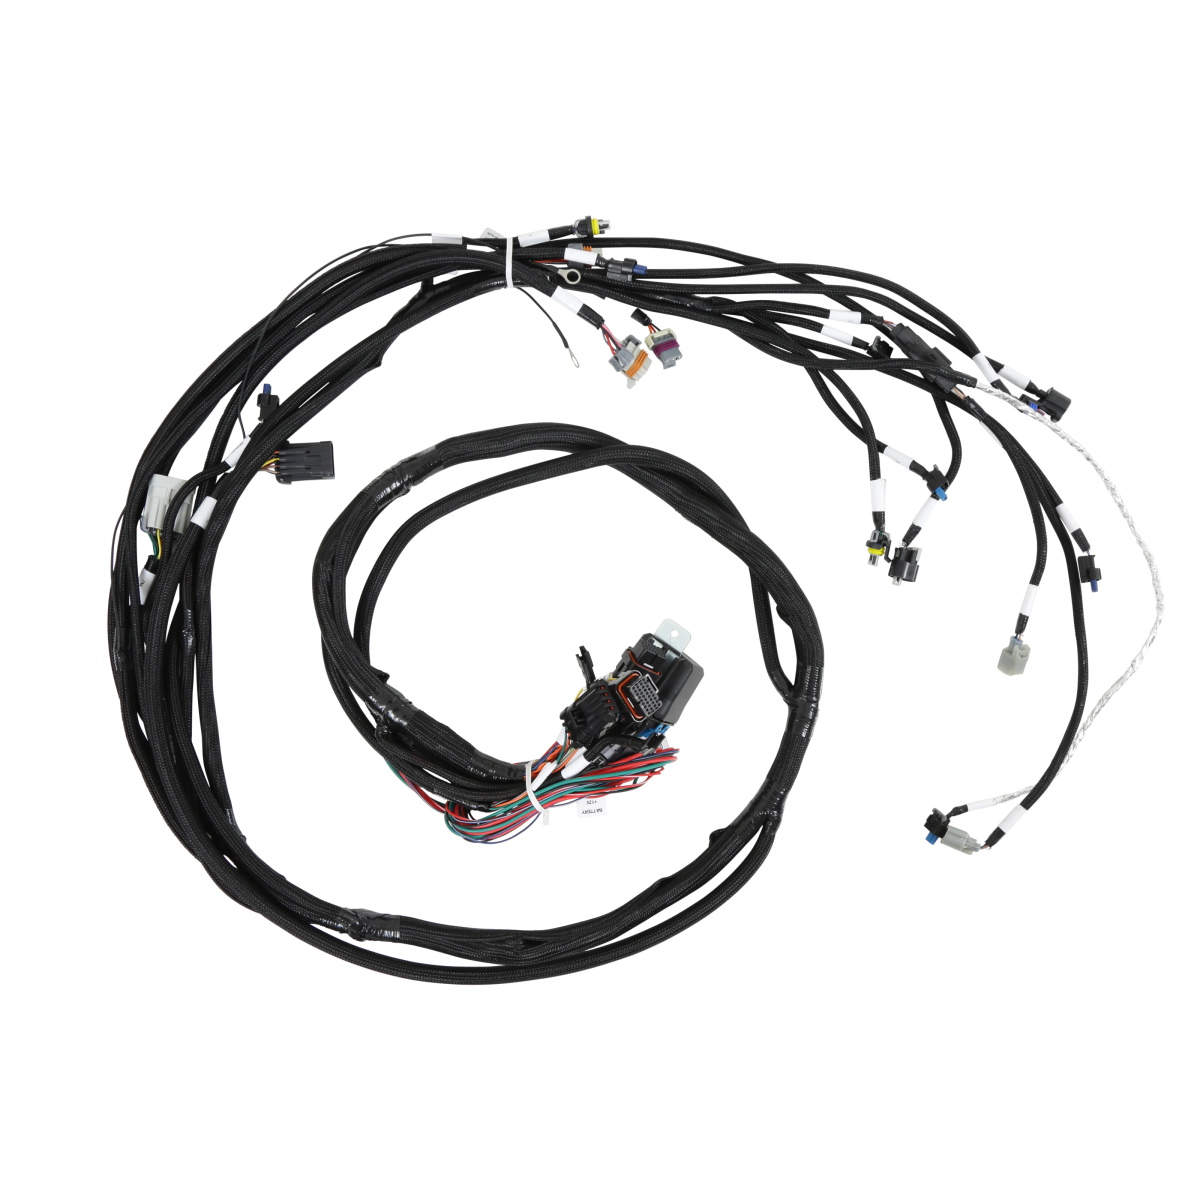 Holley - Holley 7.3L Godzilla Main Harness W/ IGN1A Smart Coils For Terminator X Max - DBW - Image 1